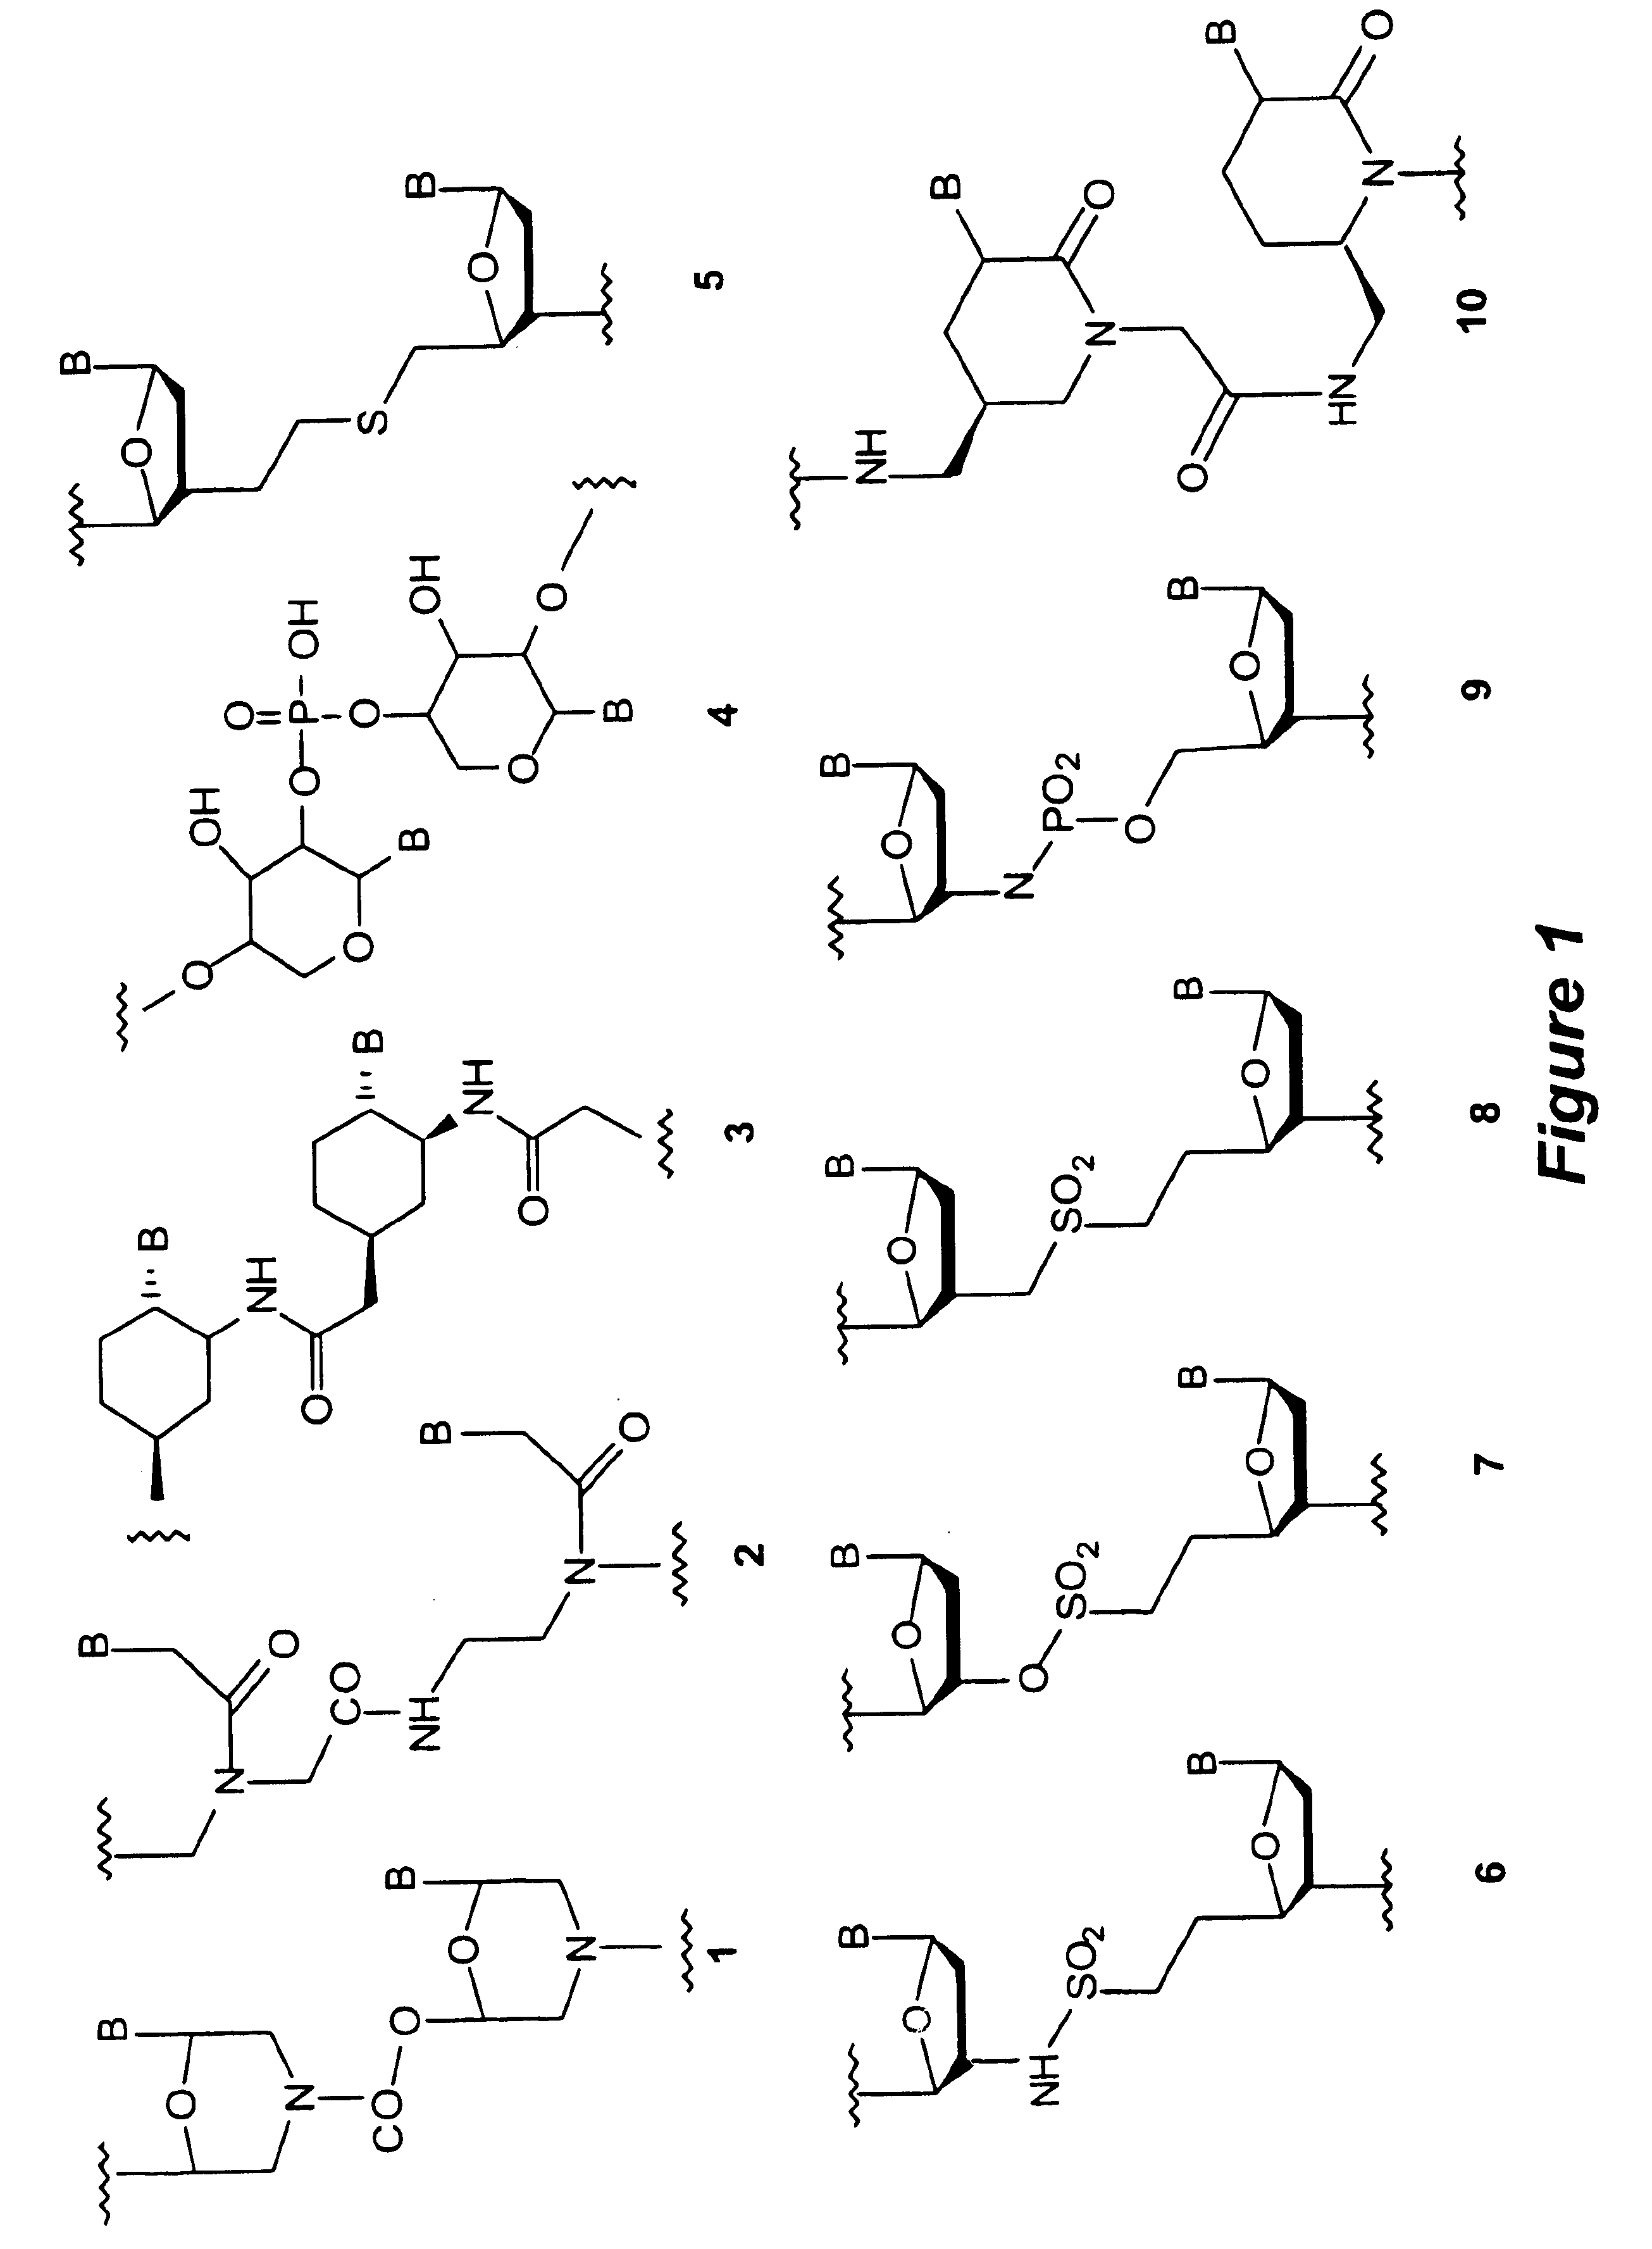 Piperazine-based nucleic acid analogs